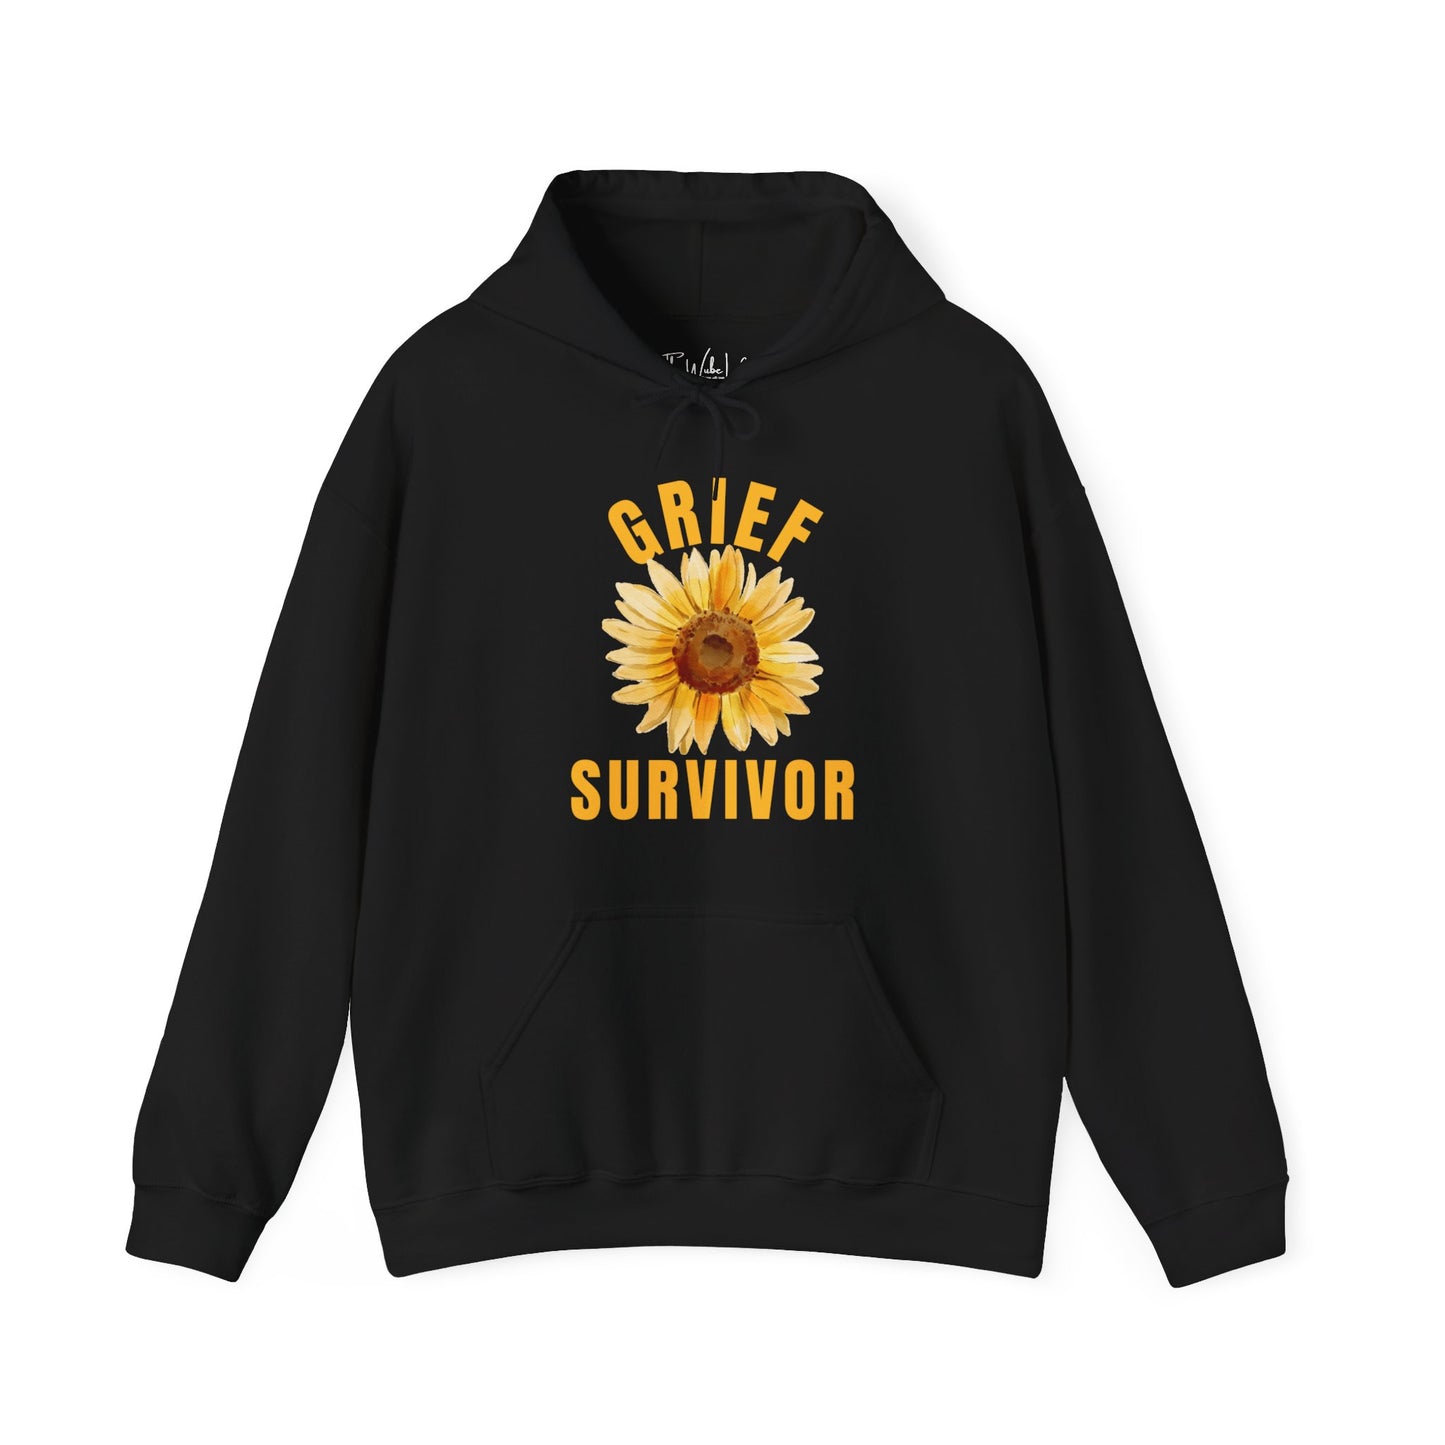 Black Gildan 18500 Hooded sweatshirt. Find solace in this cozy hoodie, that combines a comforting design and powerful message of survival and strength during times of grieving.